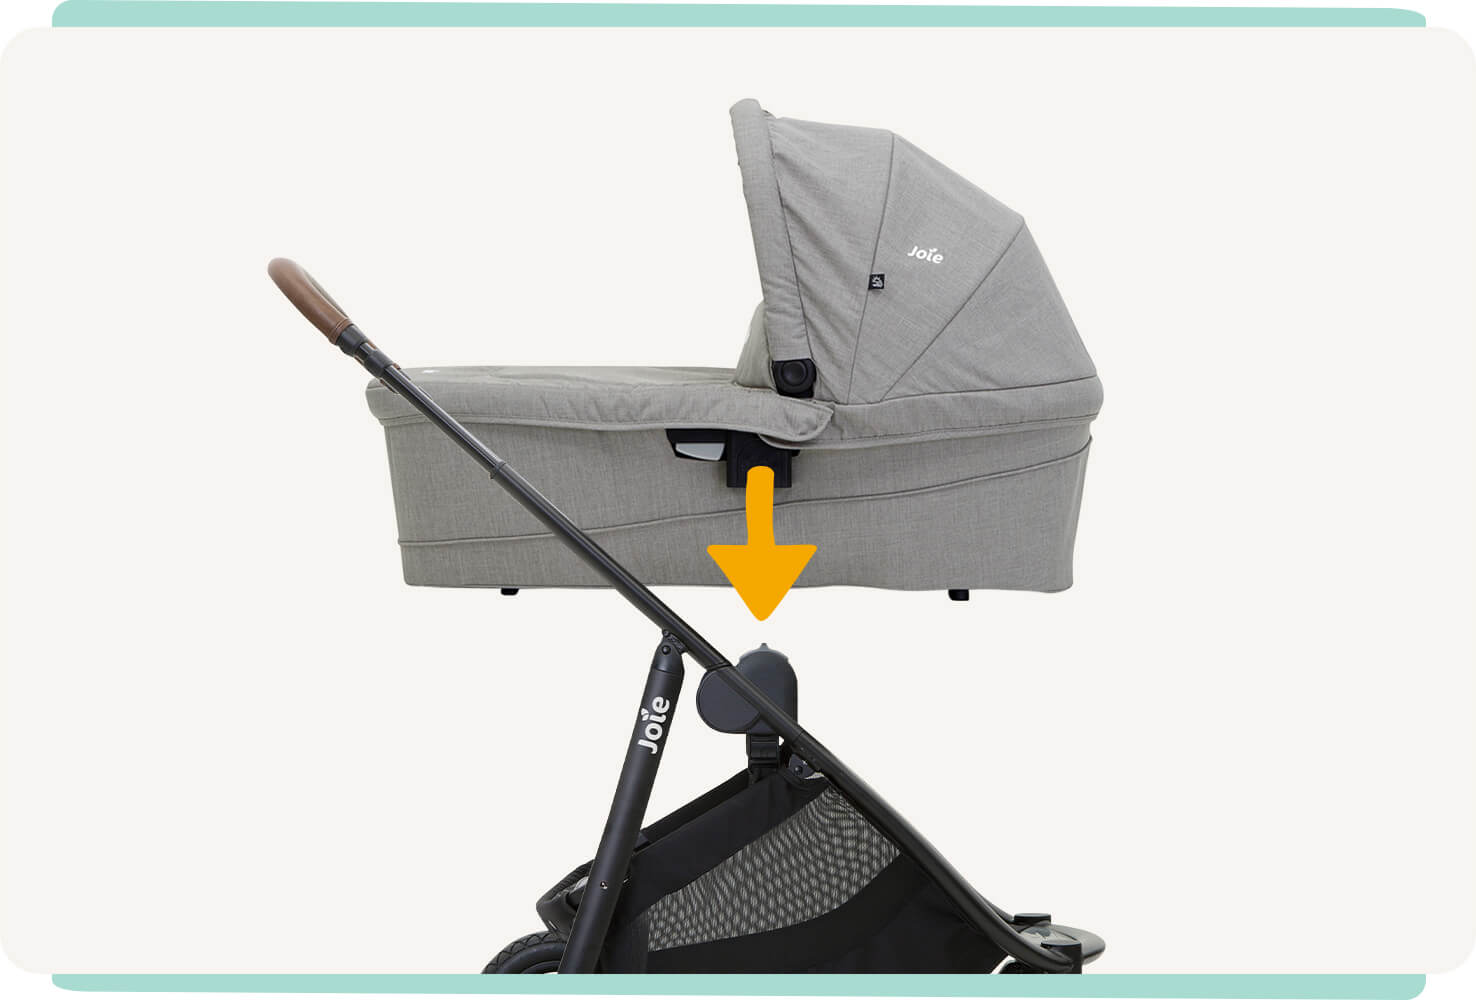  Joie Ramble xl carry cot in light gray hovering over pushchair with an arrow pointing to the connector. 